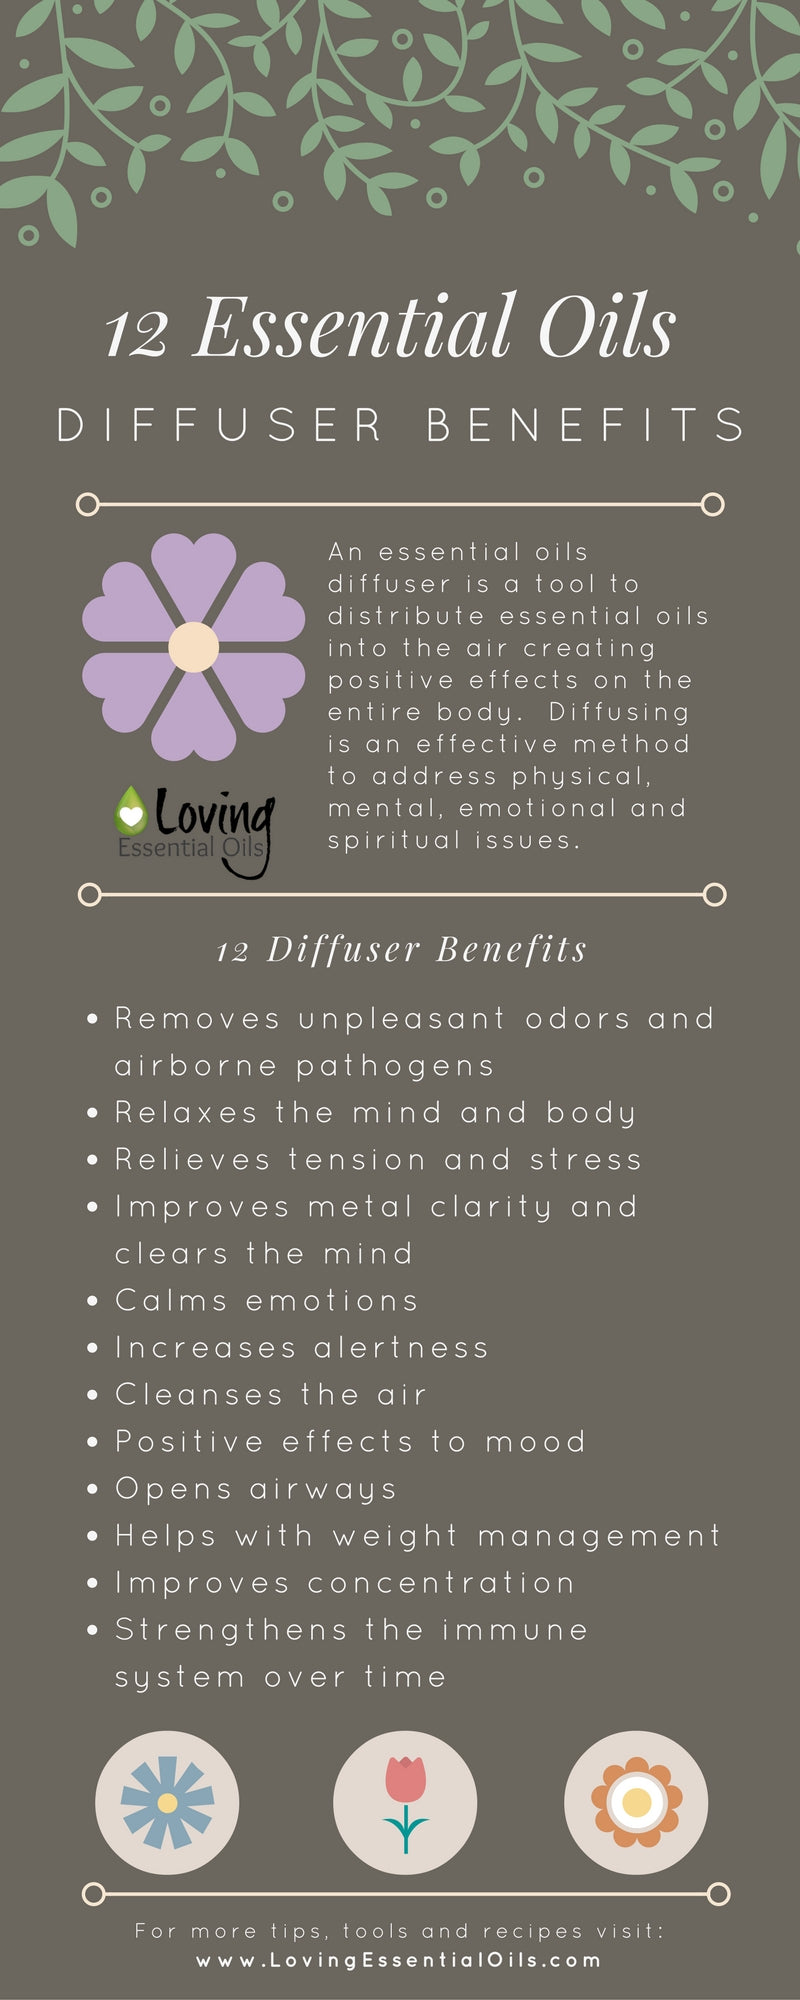 12 Essential Oil Diffuser Benefits Infographic - Learn How Beneficial Aromatherapy Can Be